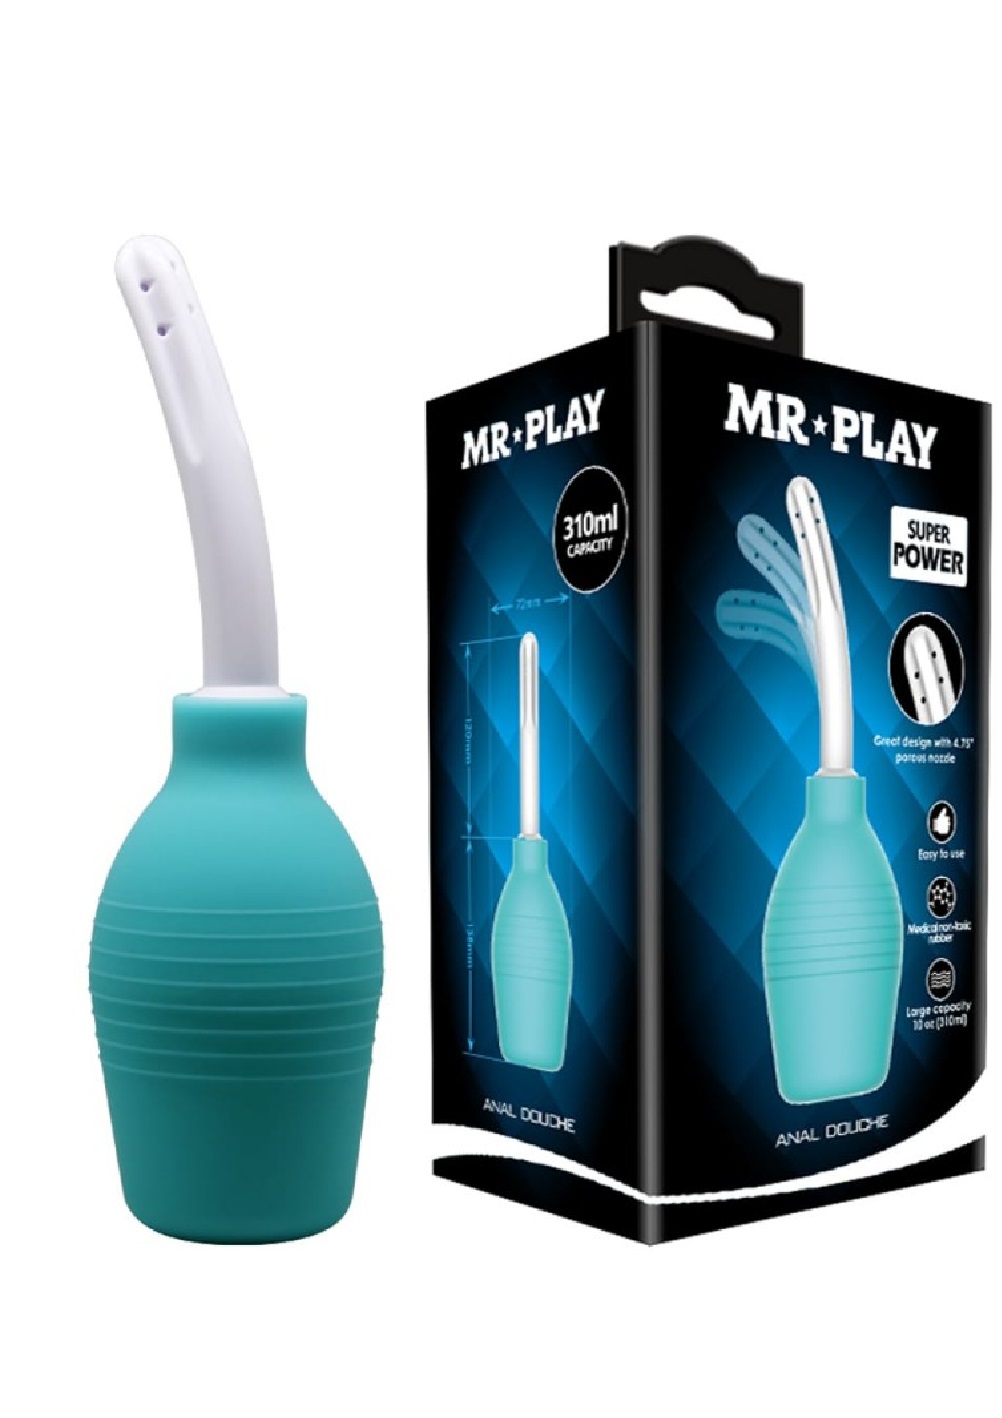 Mr. Play Anal Douche.